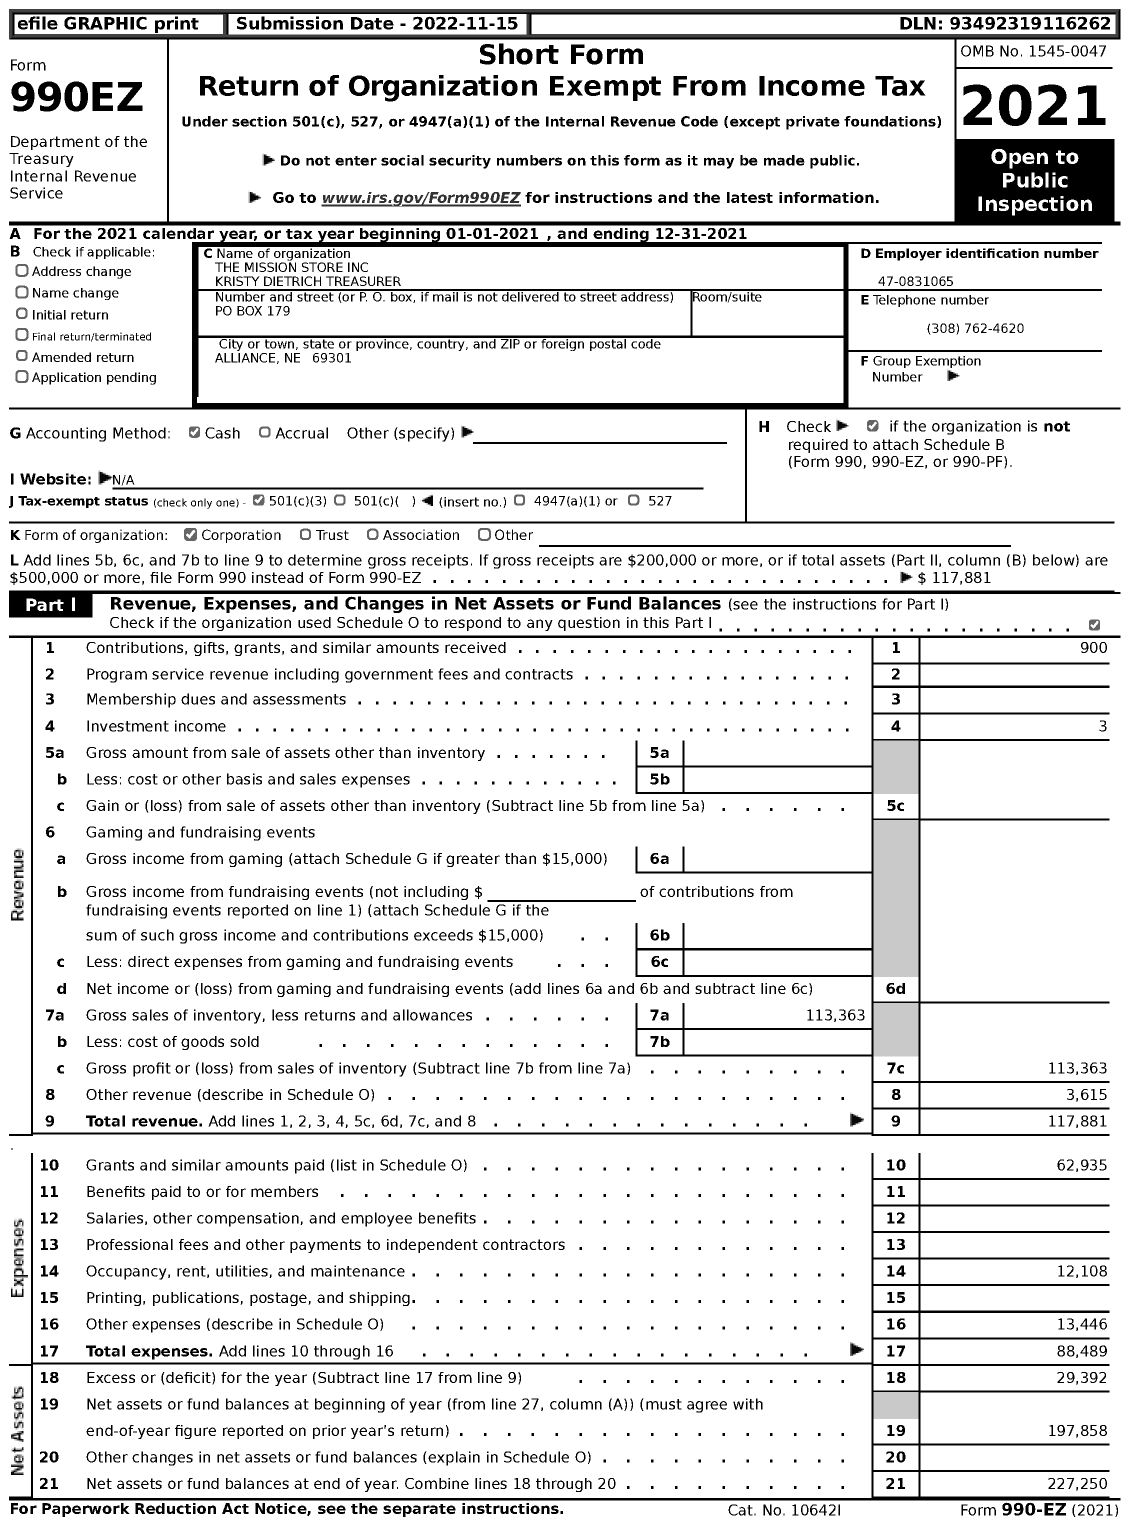 Image of first page of 2021 Form 990EZ for The Mission Store Kristy Dietrich Treasurer